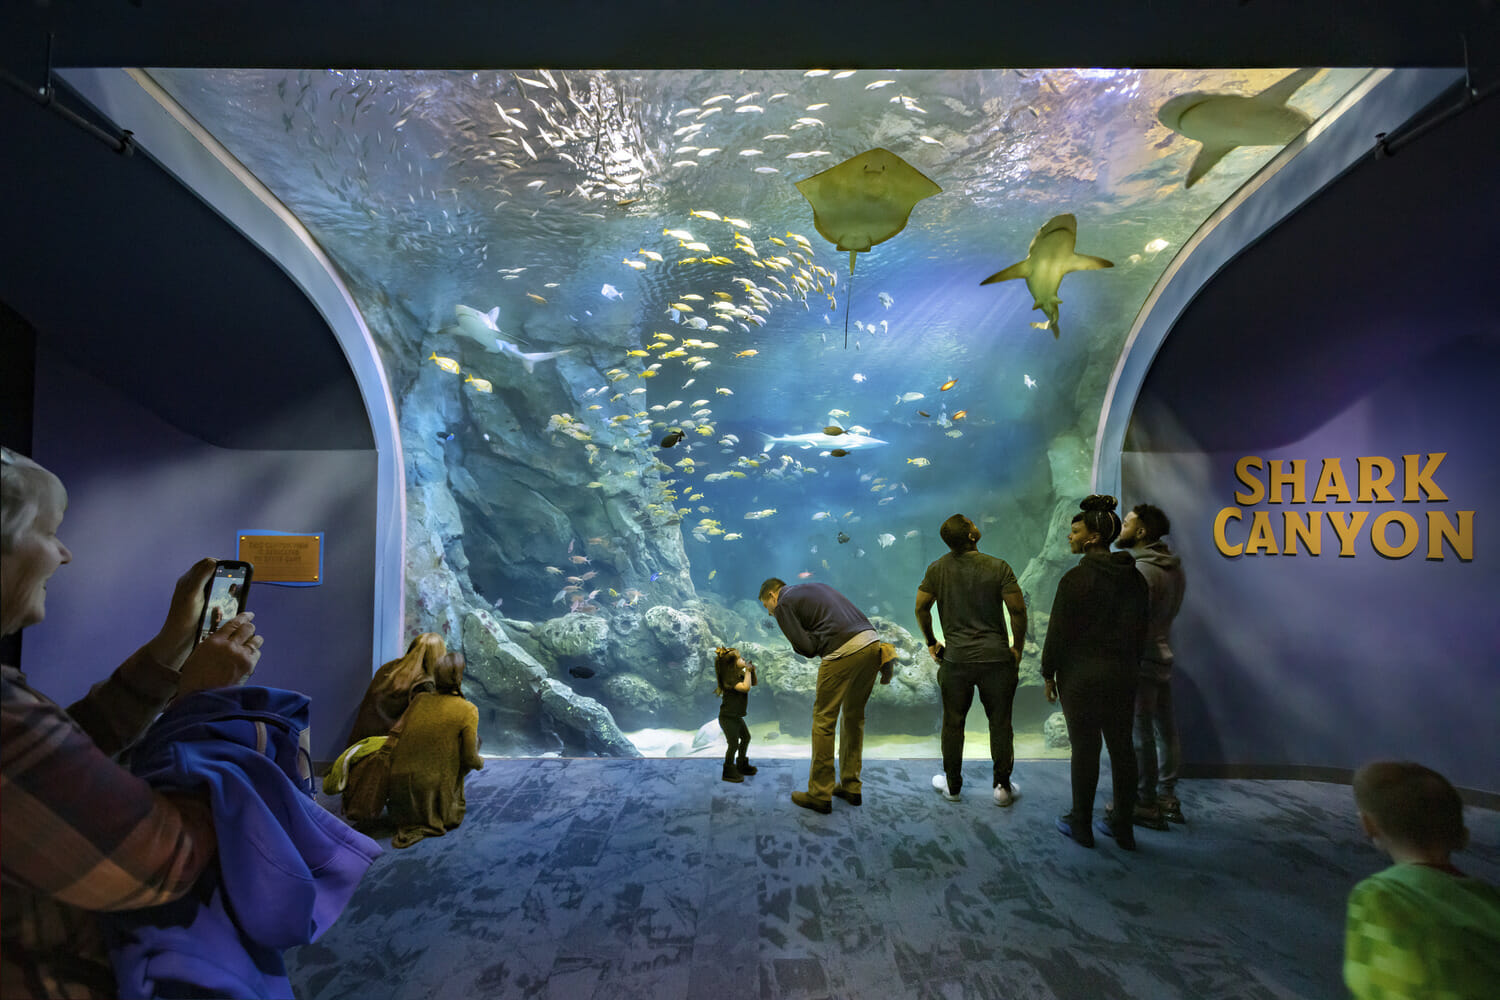 A group of people are looking at a shark canyon exhibit.